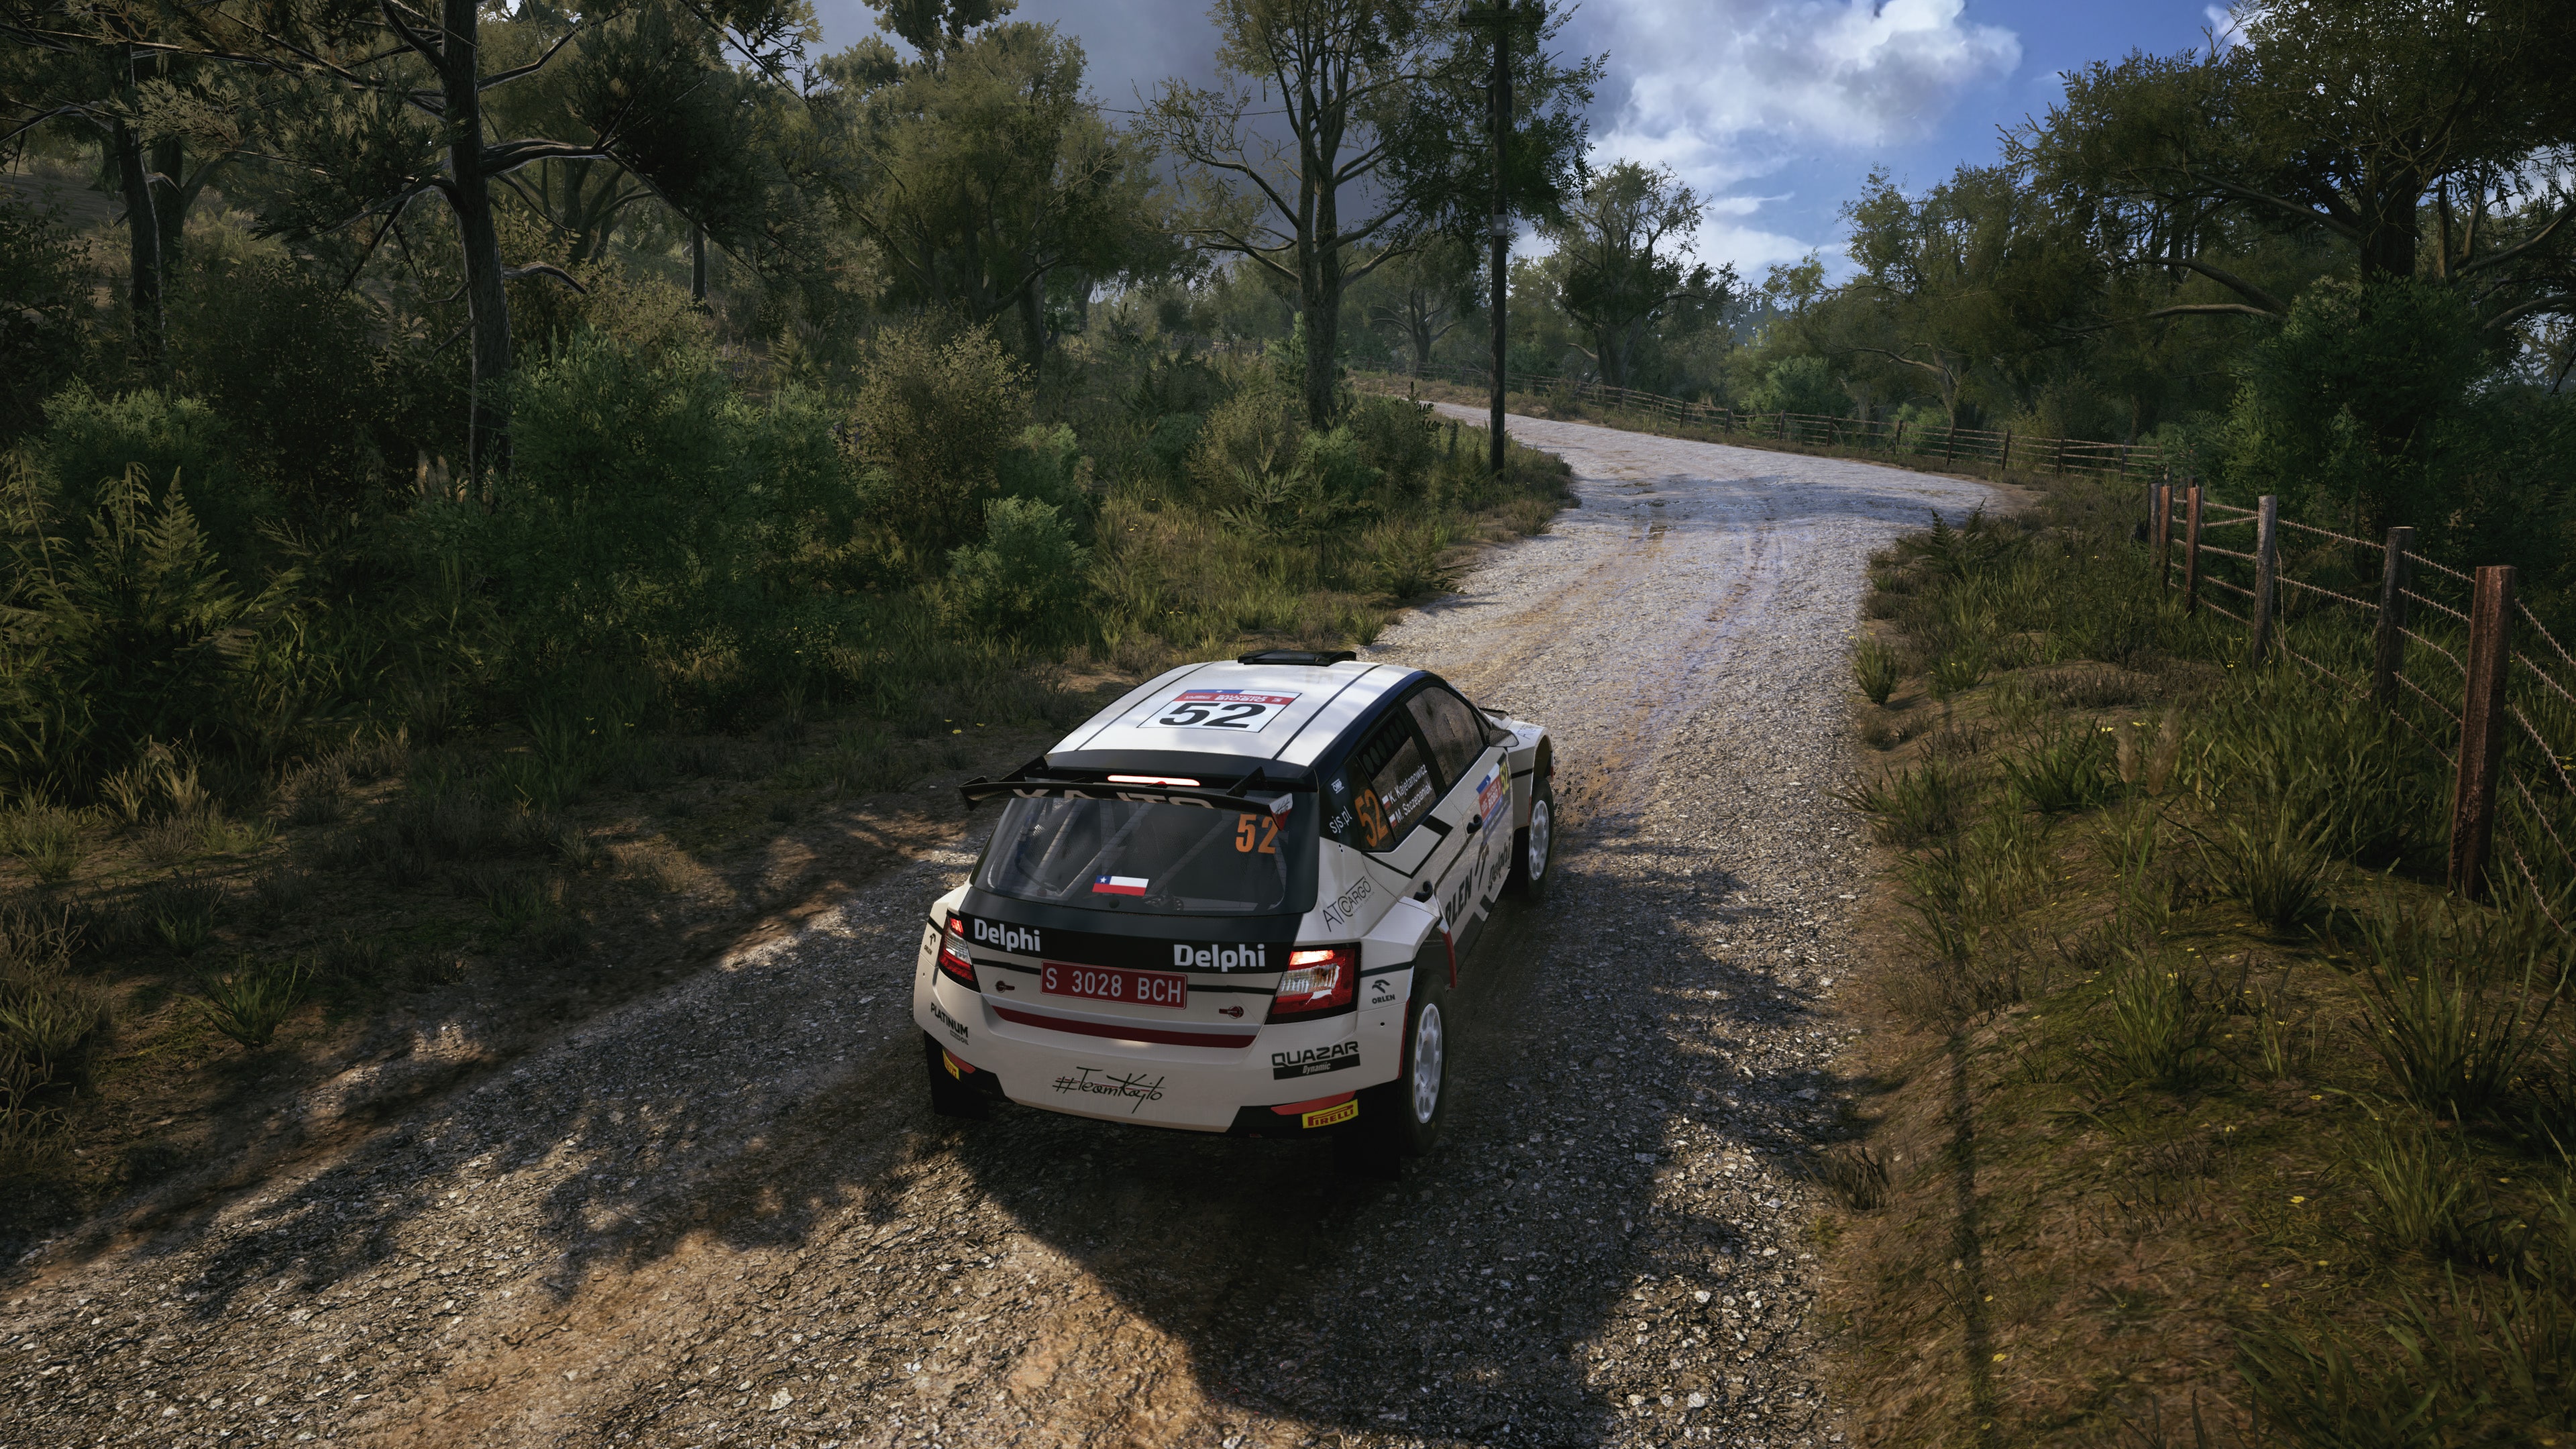 WRC (2023) (PS5) cheap - Price of $39.93